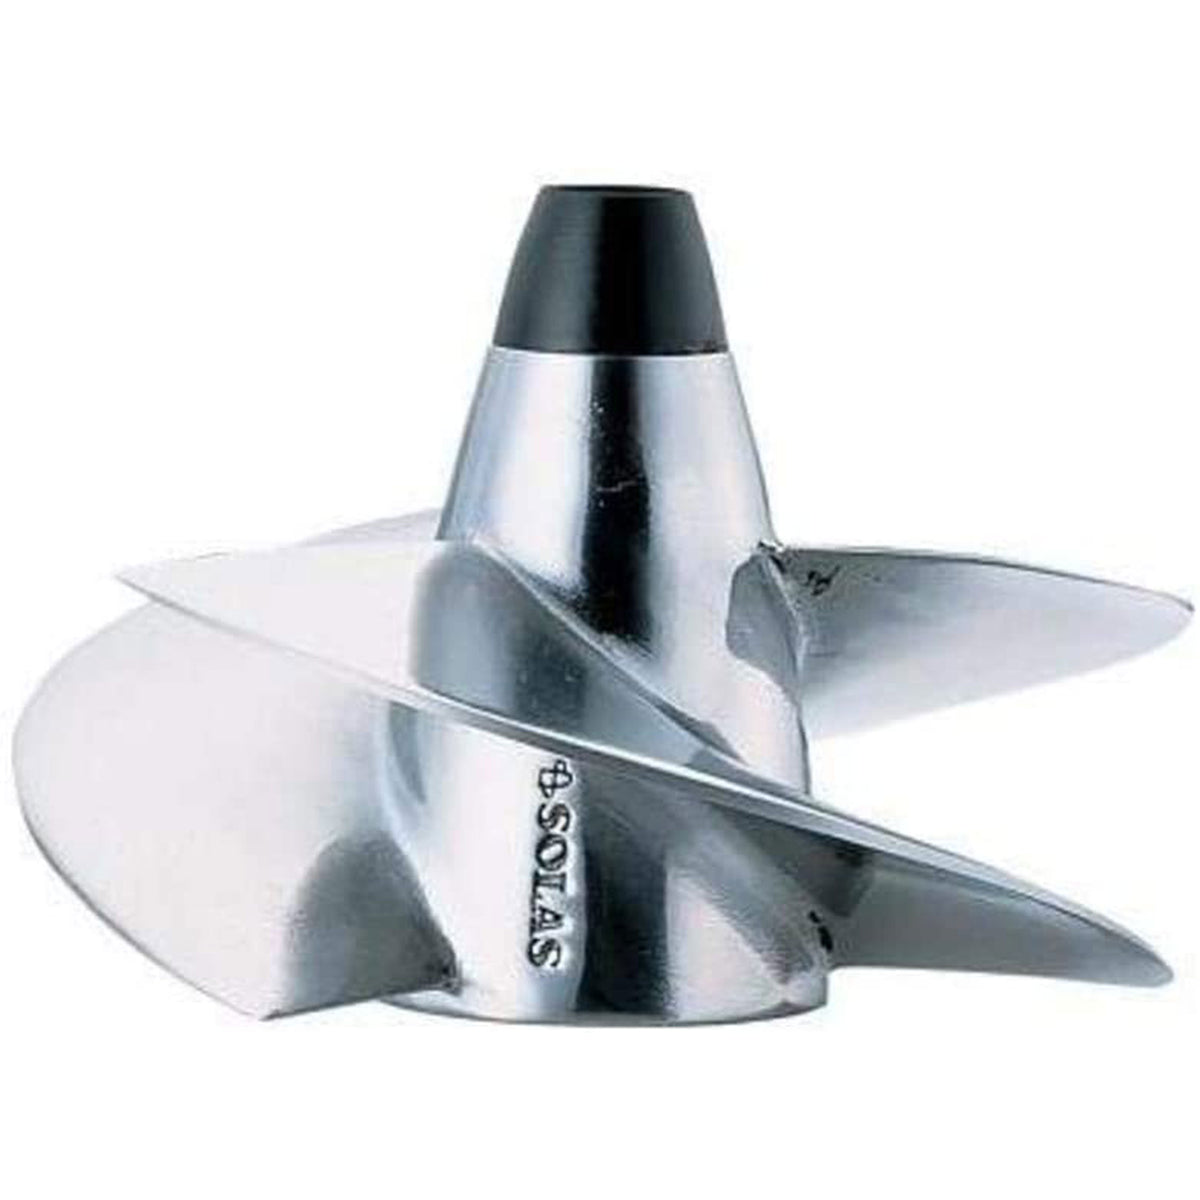 Solas SX4-CD-13/16 Concord 4-Blade Impeller for Select Sea-Doo PWC with 161mm Pump Diameter